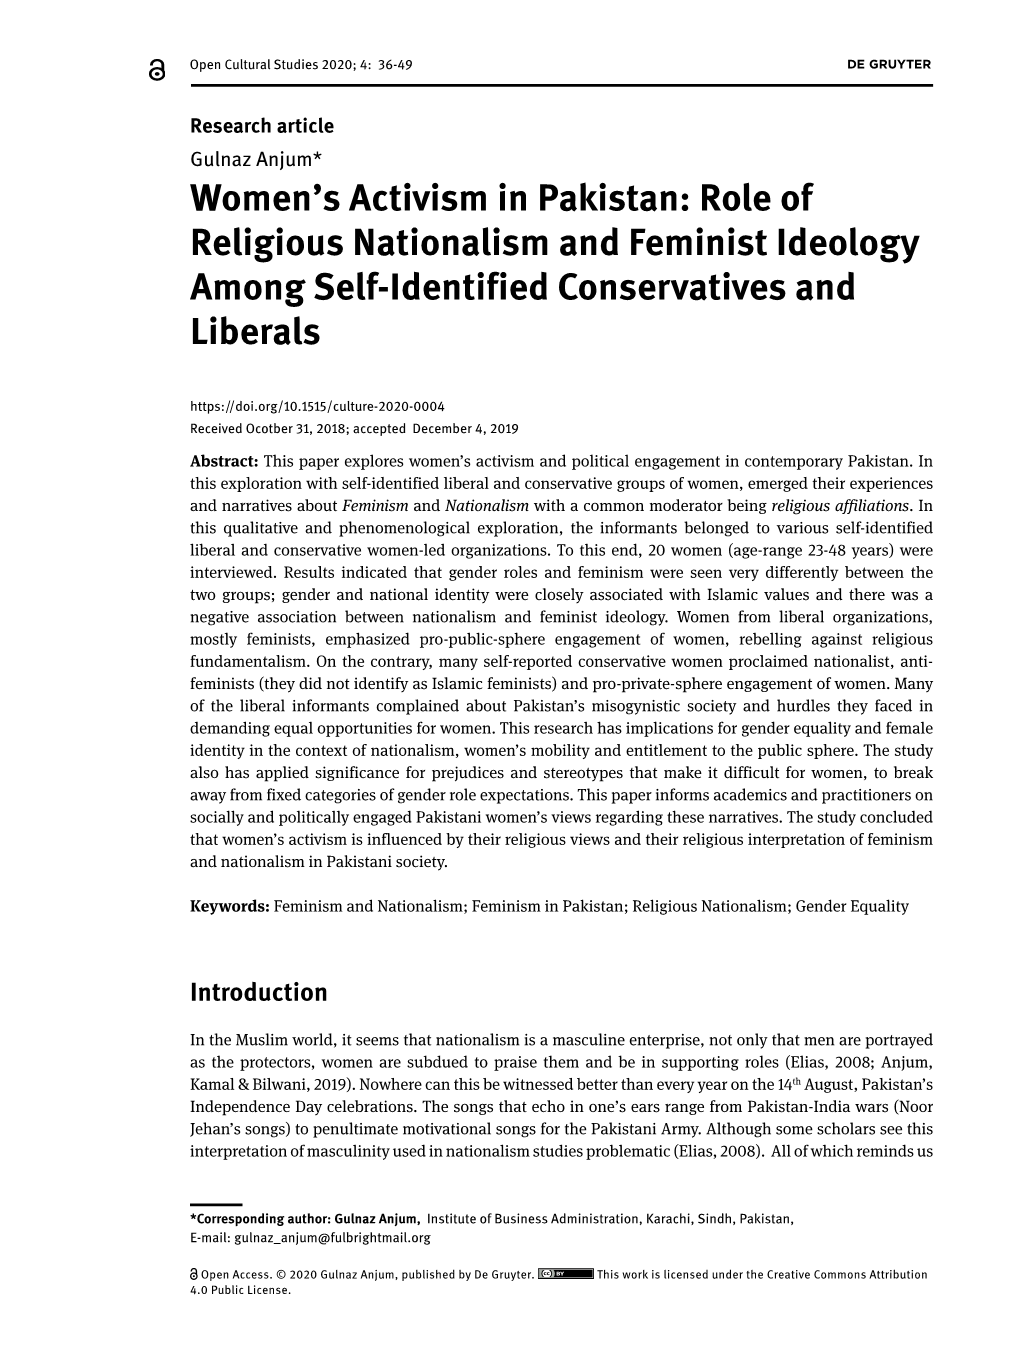 Women's Activism in Pakistan: Role of Religious Nationalism and Feminist